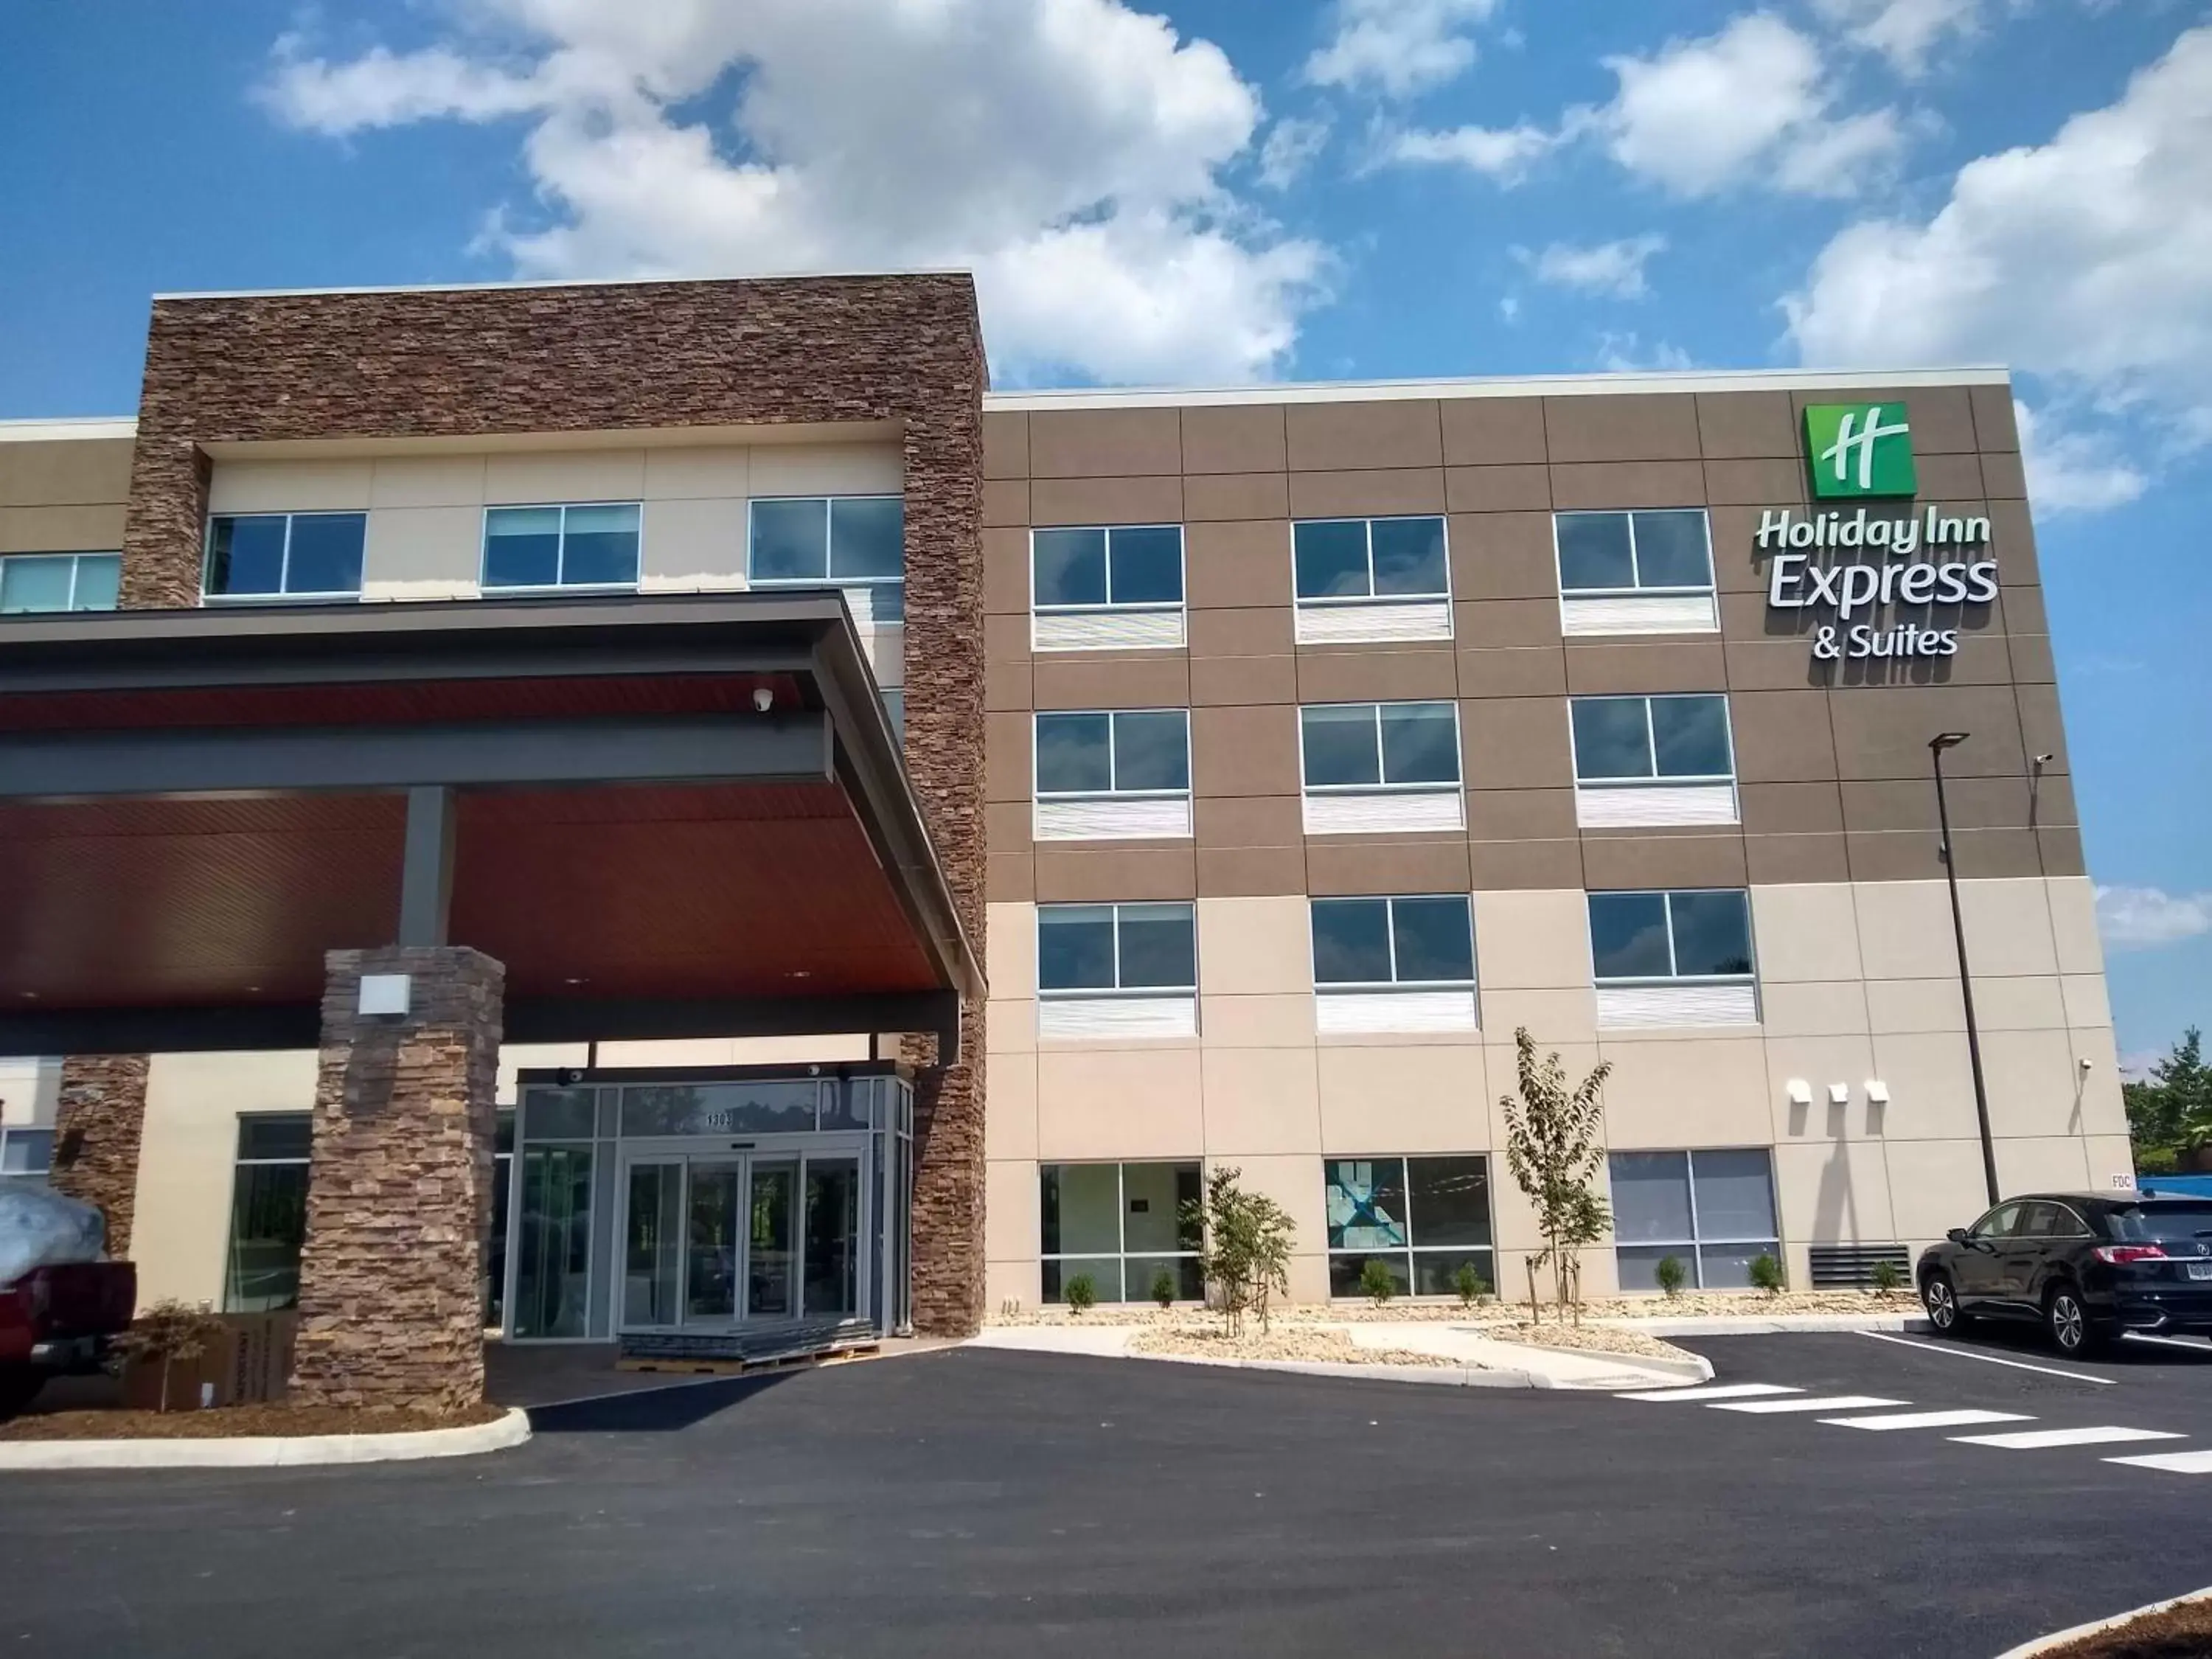 Facade/entrance, Property Building in Holiday Inn Express & Suites - Roanoke – Civic Center